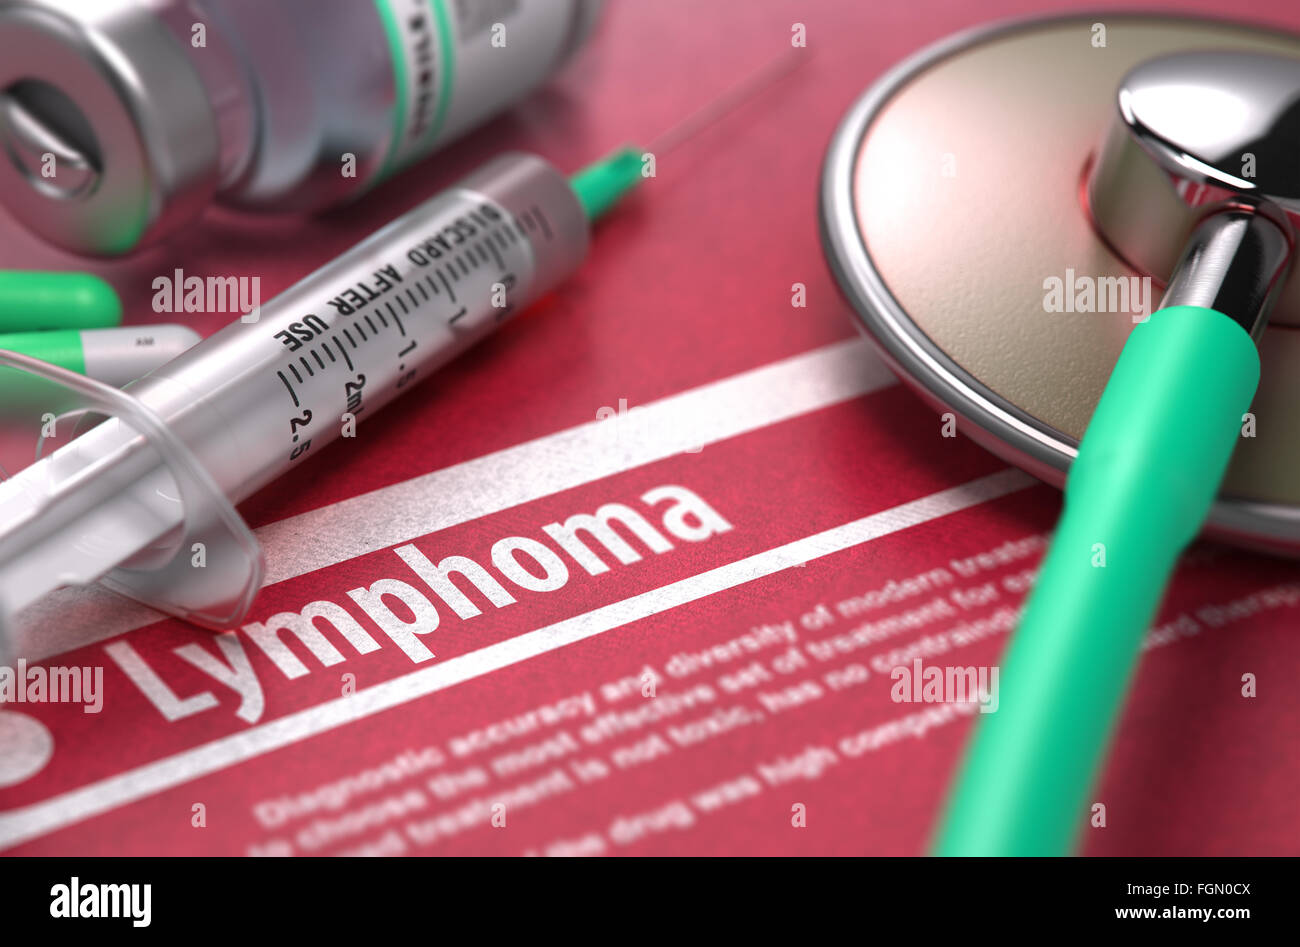 Lymphoma. Medical Concept on Red Background. Stock Photo